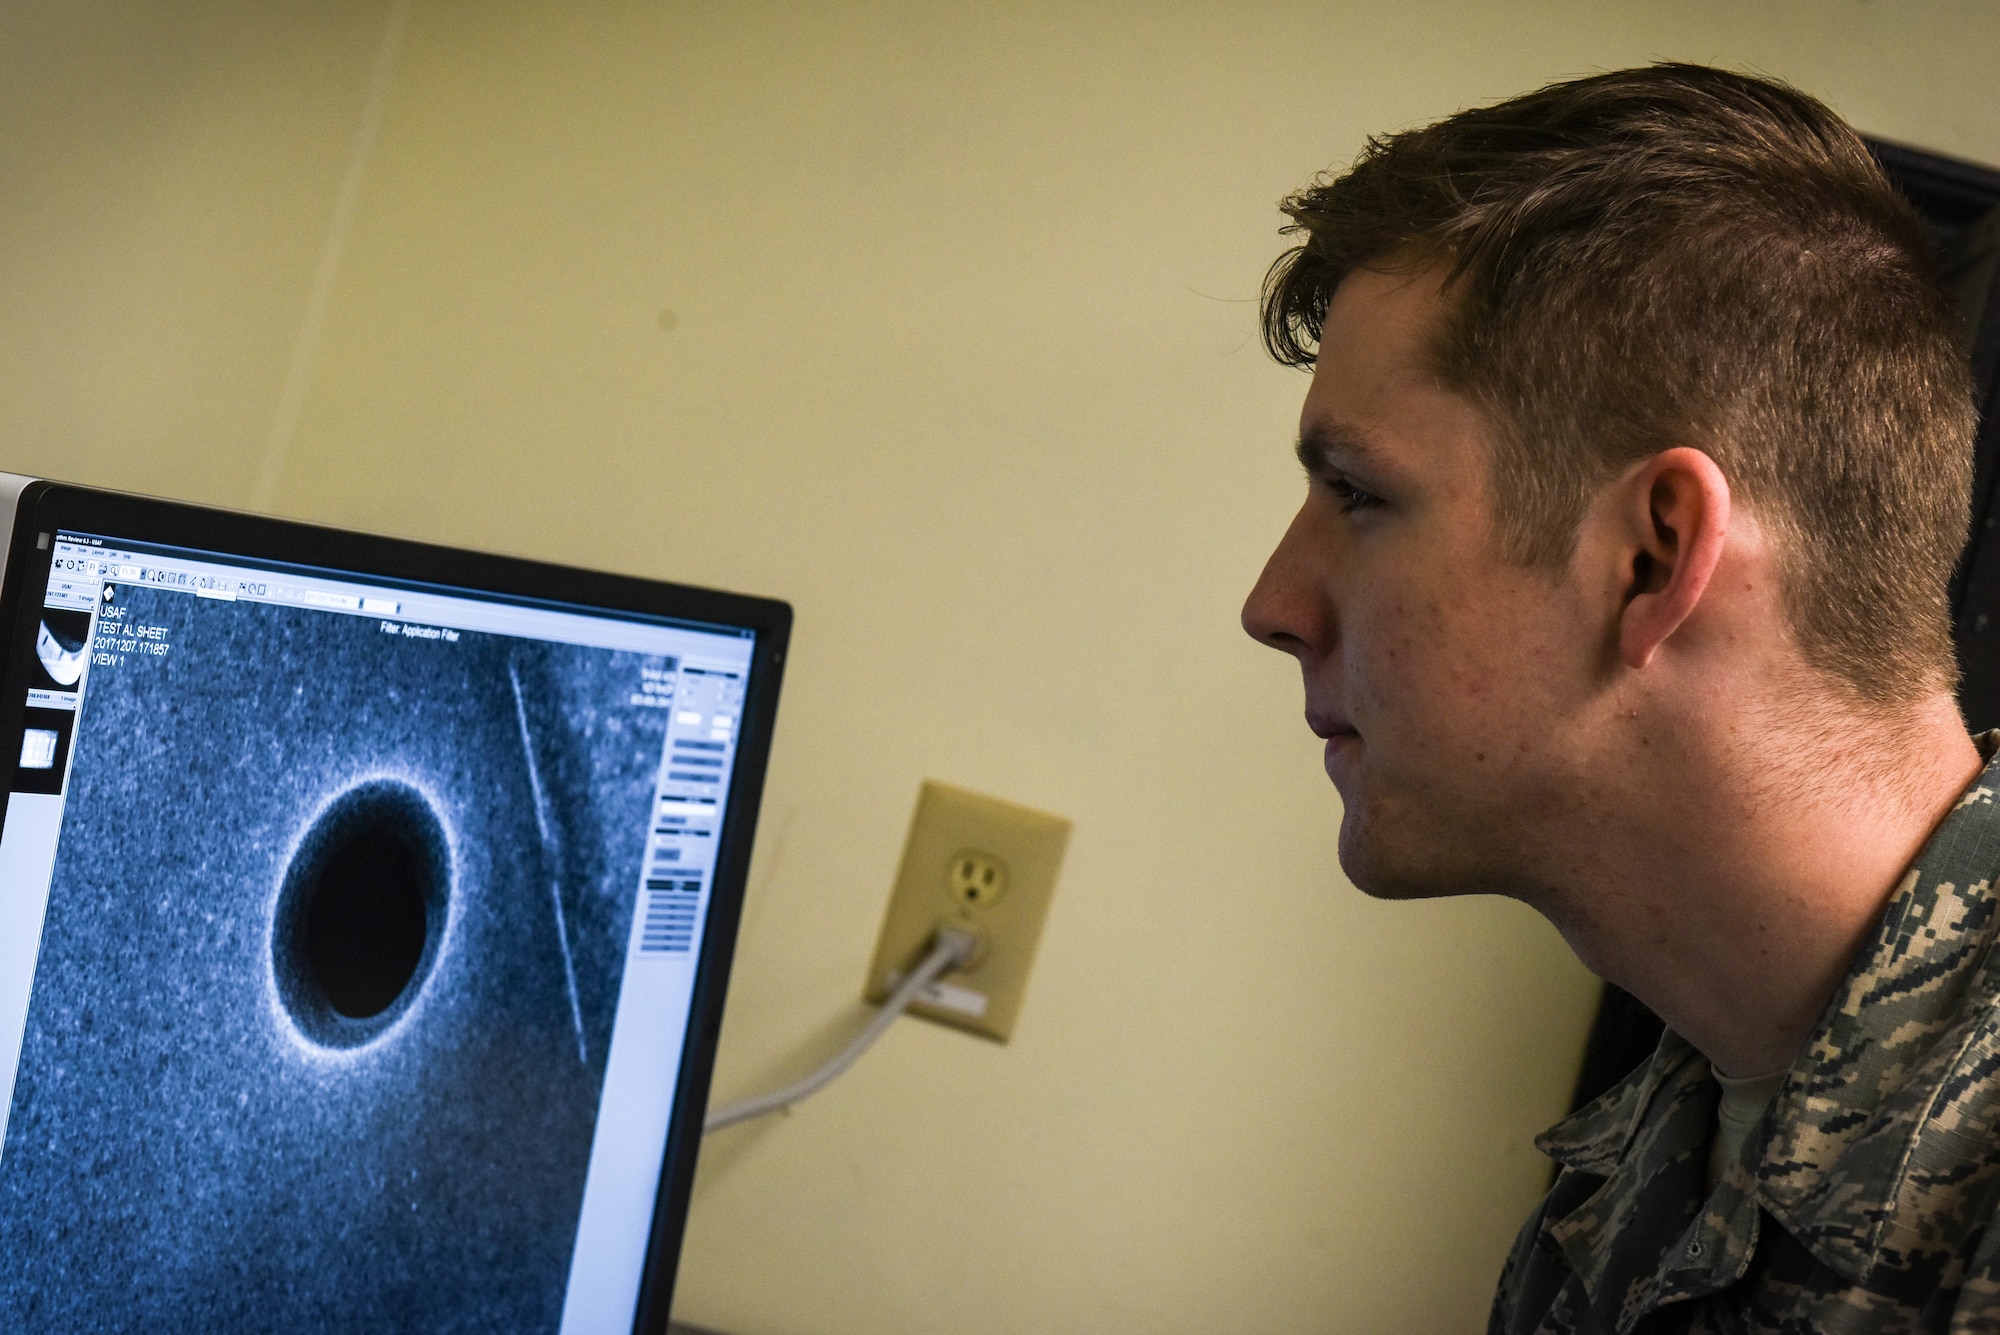 U.S. Air Force Airman 1st Class Tyler Chance, 20th Equipment Maintenance Squadron nondestructive inspection (NDI) journeyman, reviews an X-ray image on a Computed Radiography Flex 2 system at Shaw Air Force Base, S.C., April 25, 2018.